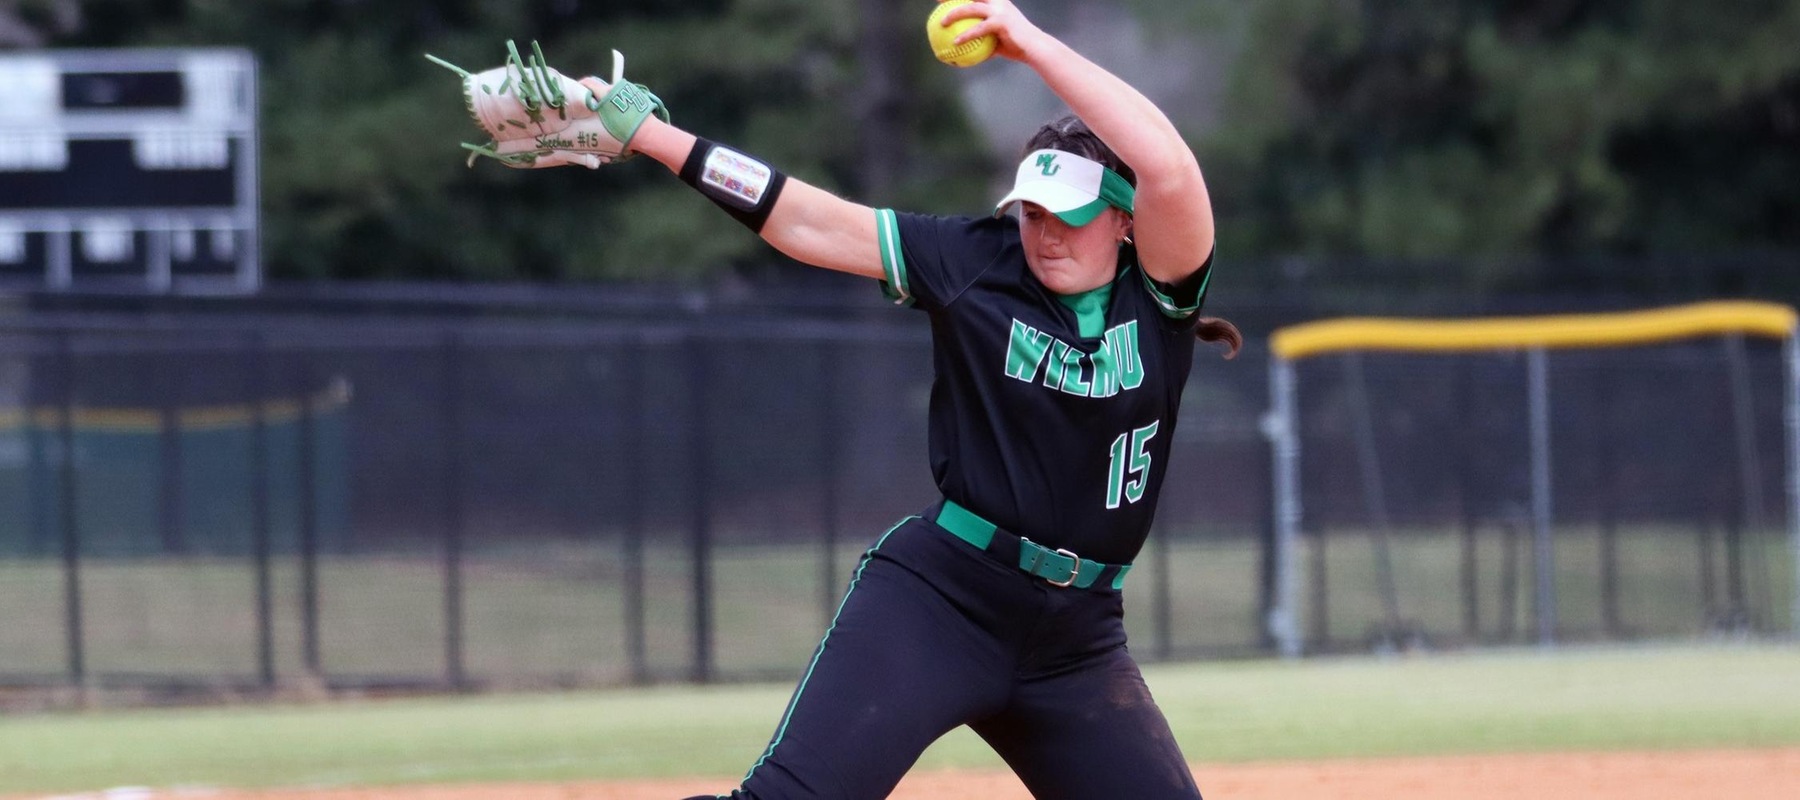 Photo of Delani Sheehan who picked up her first win as a Wildcat over No. 18 LIncoln Memorial. Copyright 2023; Wilmington University. All rights reserved. Photo by Erin Harvey. February 24, 2023 in Columbus, Ga.